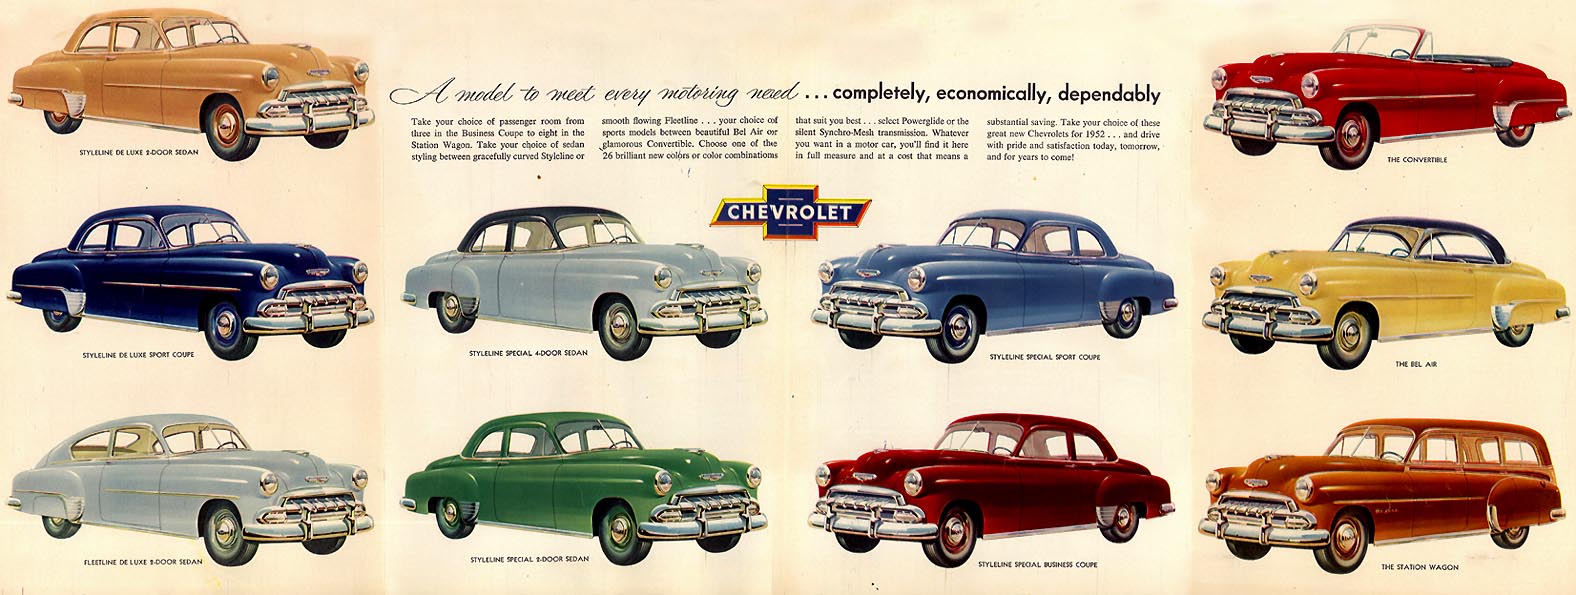 1952 Chevrolet Brochure Page 2